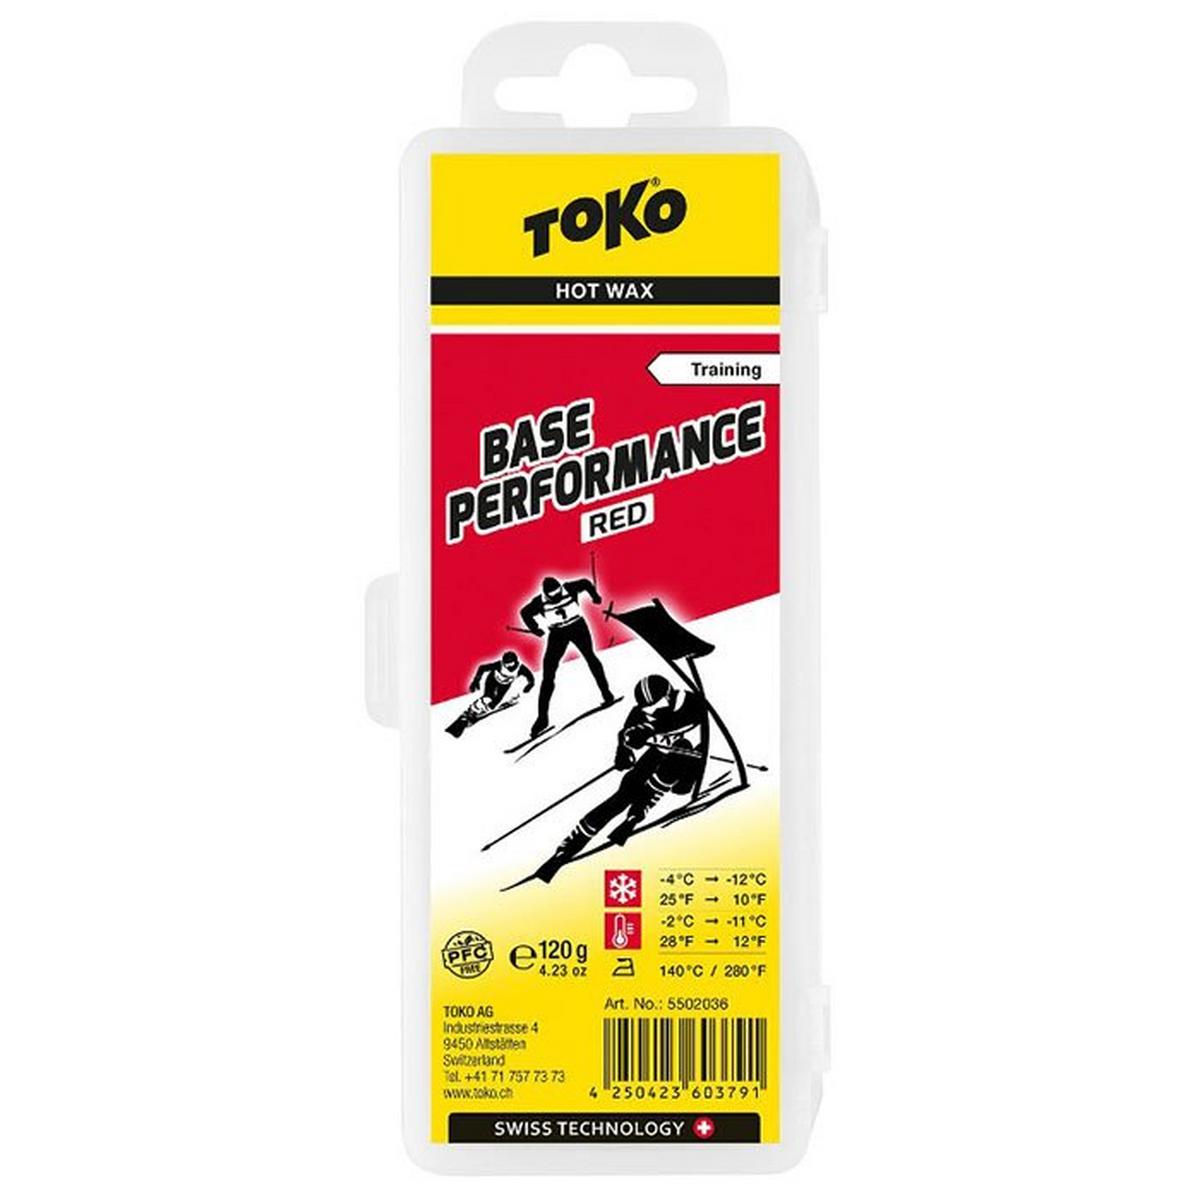 Base Performance Red Hot Wax (120g)